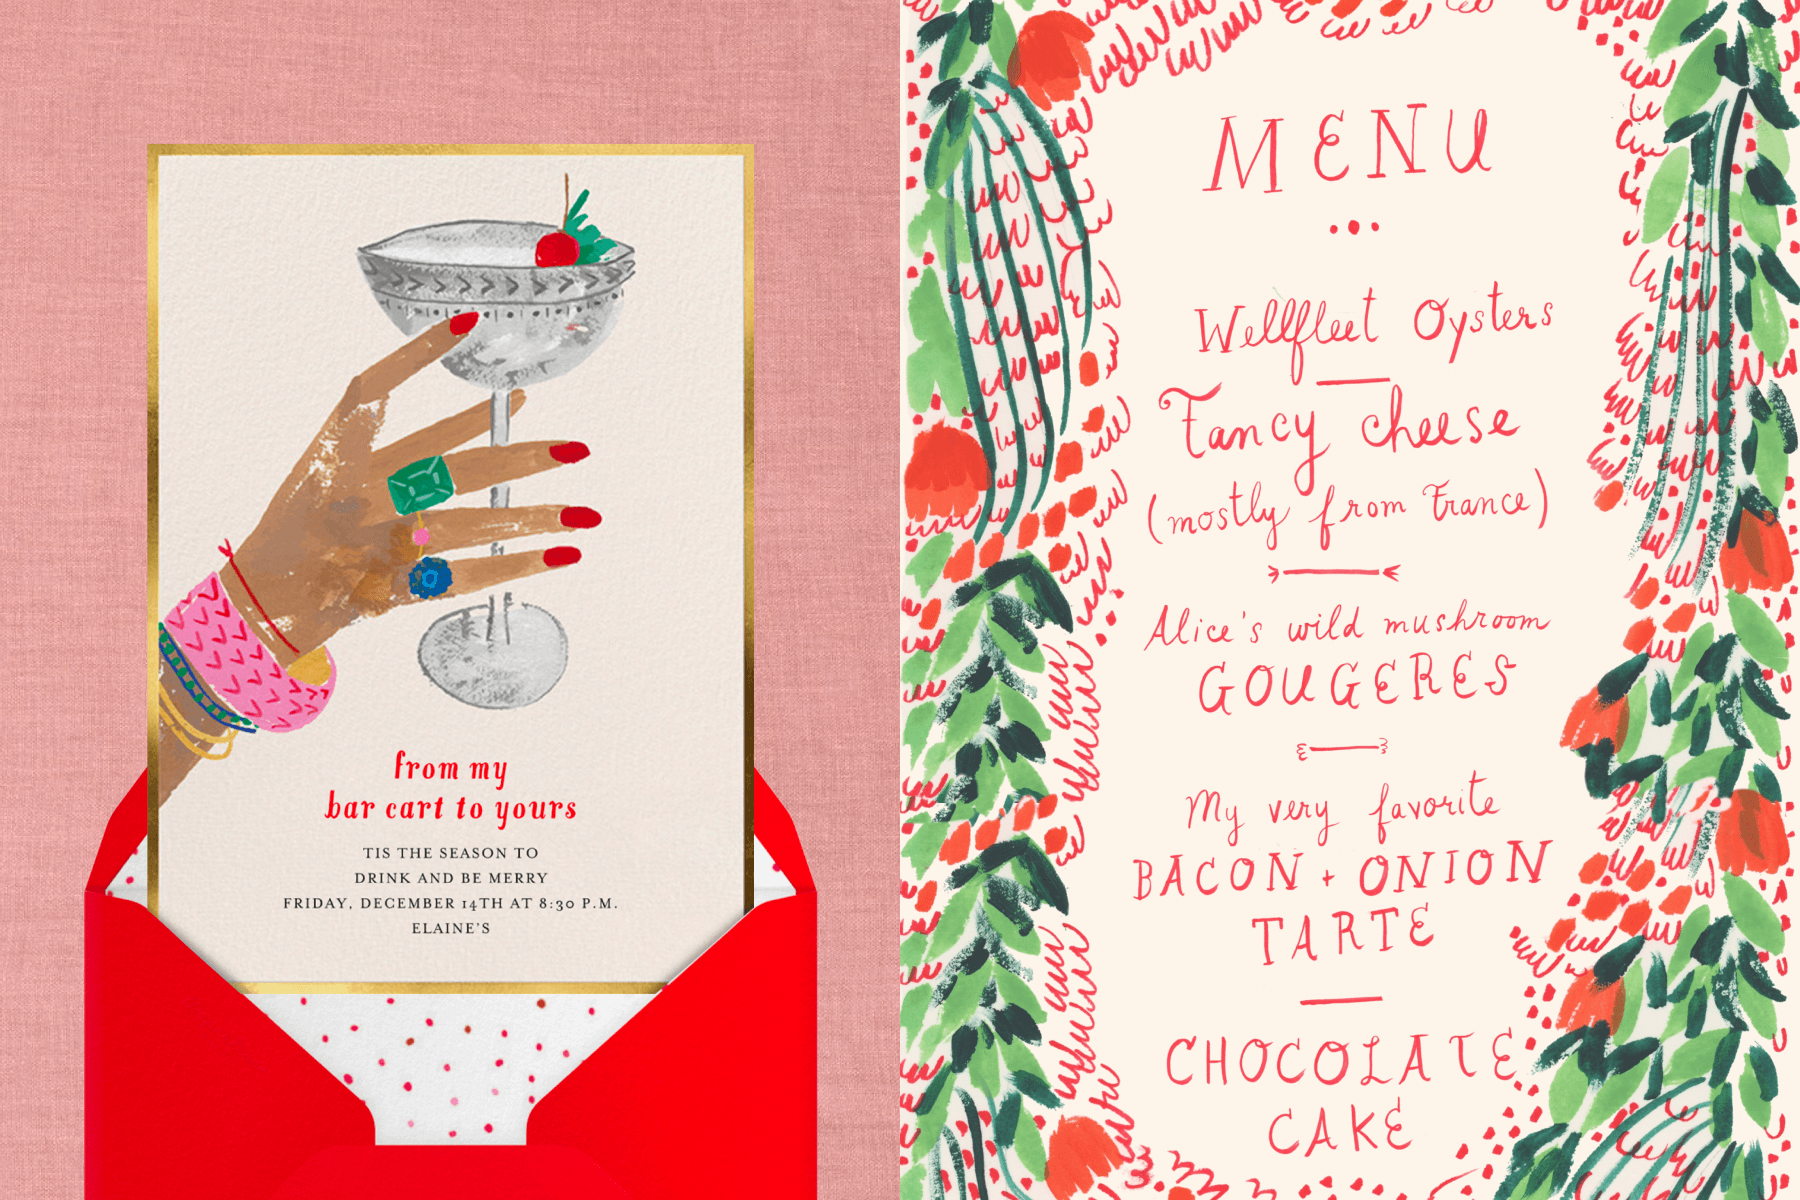 left: A cocktail party invitation with a painting of a hand wearing red nail polish and colorful jewelry holding an engraved coupe glass with a cherry garnish. Right: A hand-drawn menu featuring multiple courses of one meal with a border of painterly greenery and red flowers